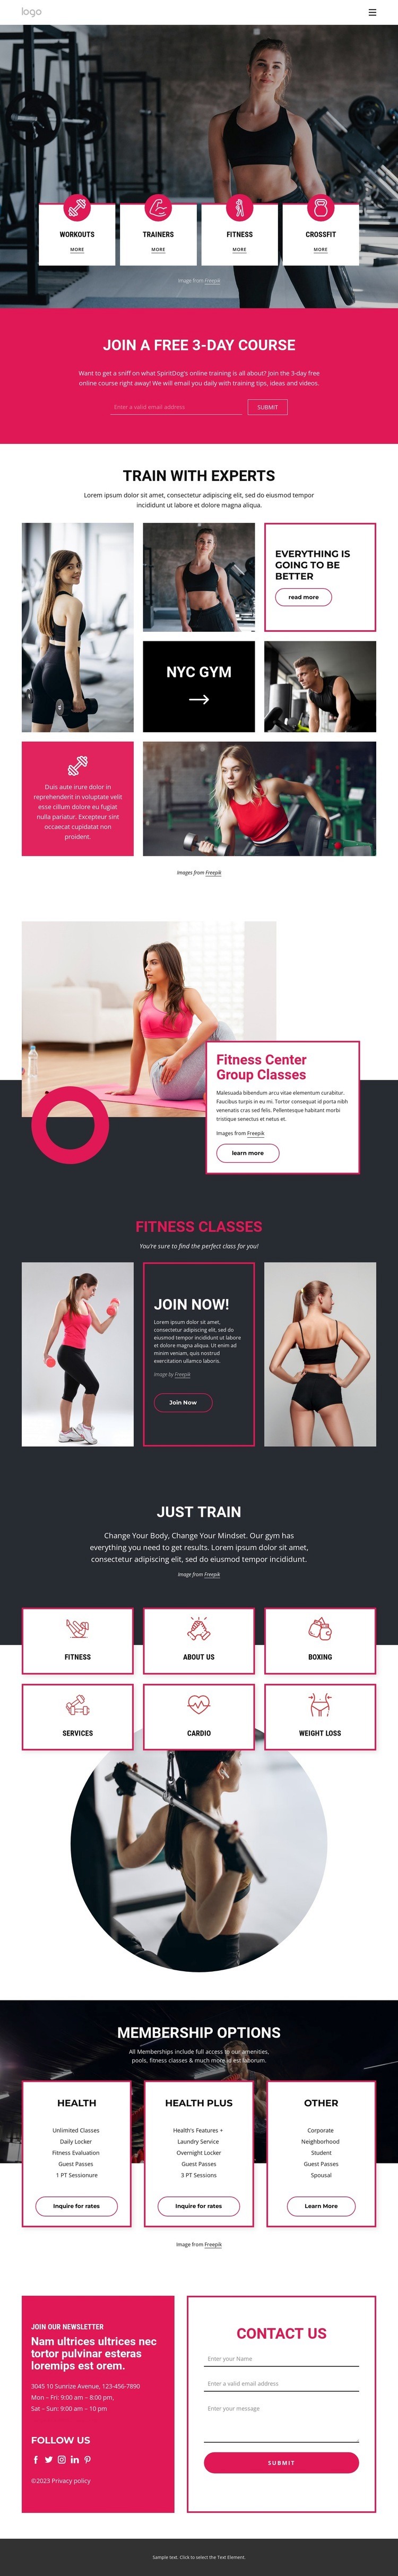 Join a Crossfit gym Elementor Template Alternative